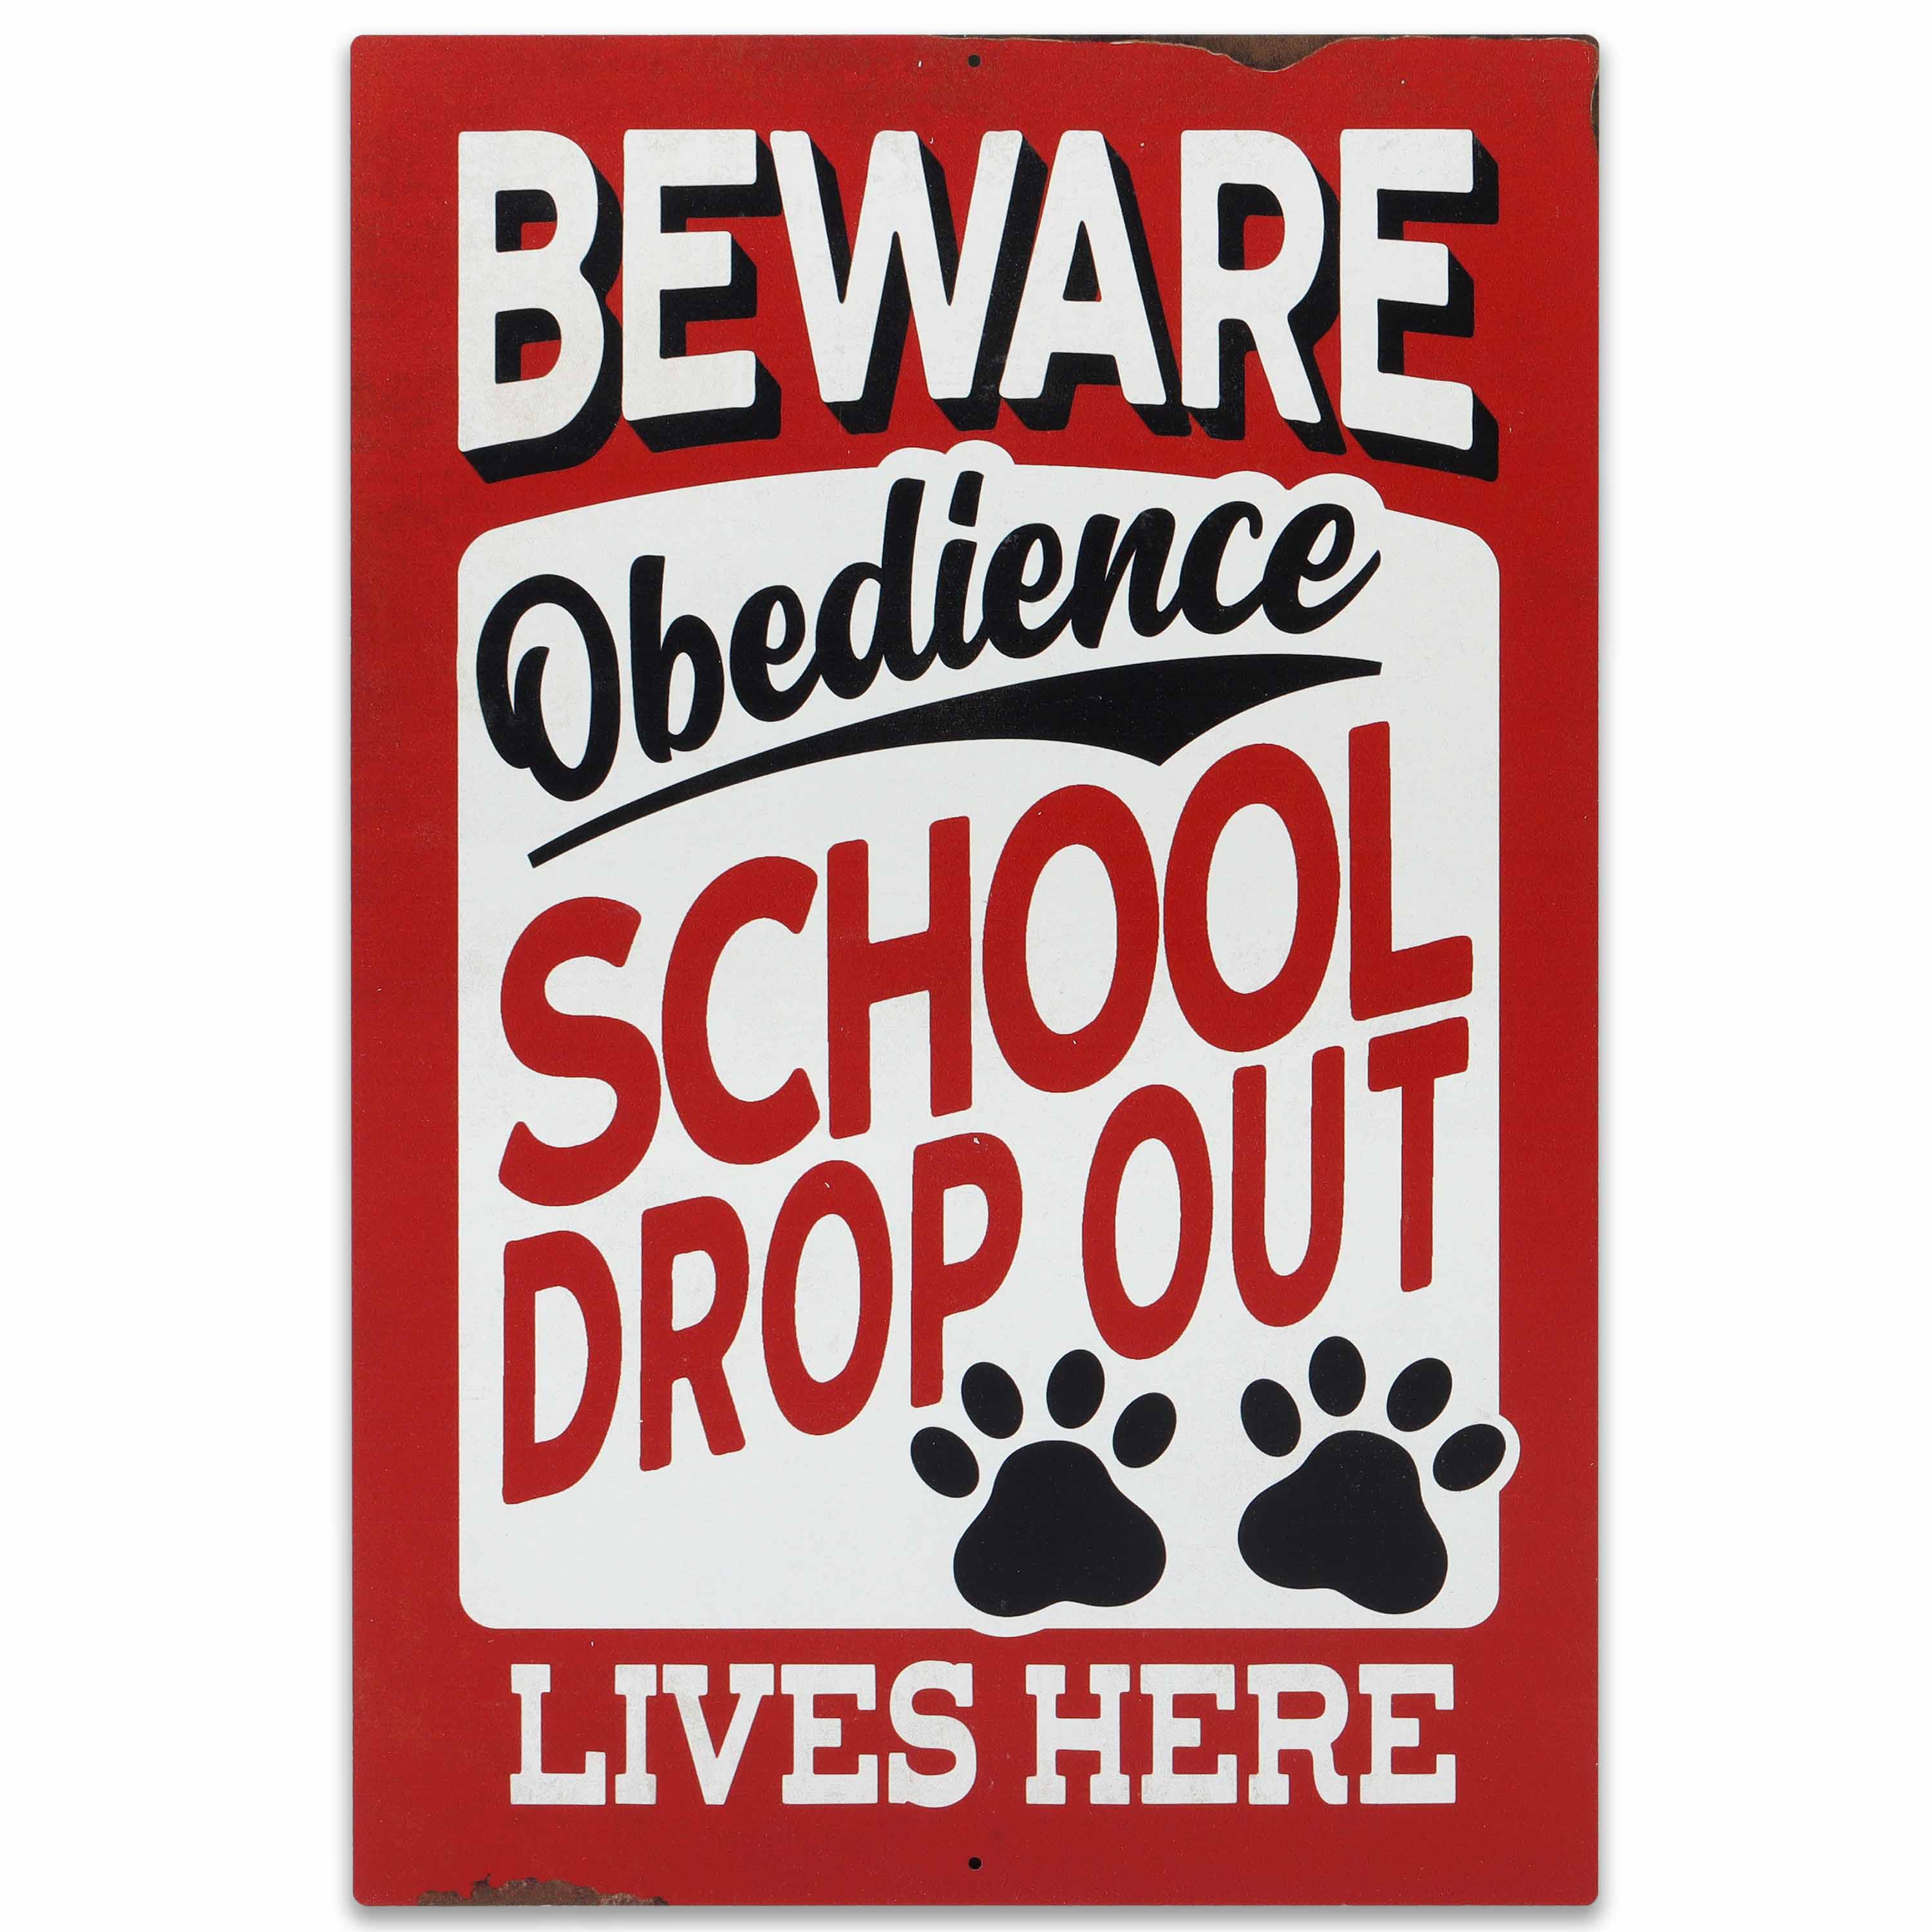 Open Road's Obedience School Drop Out Metal Sign